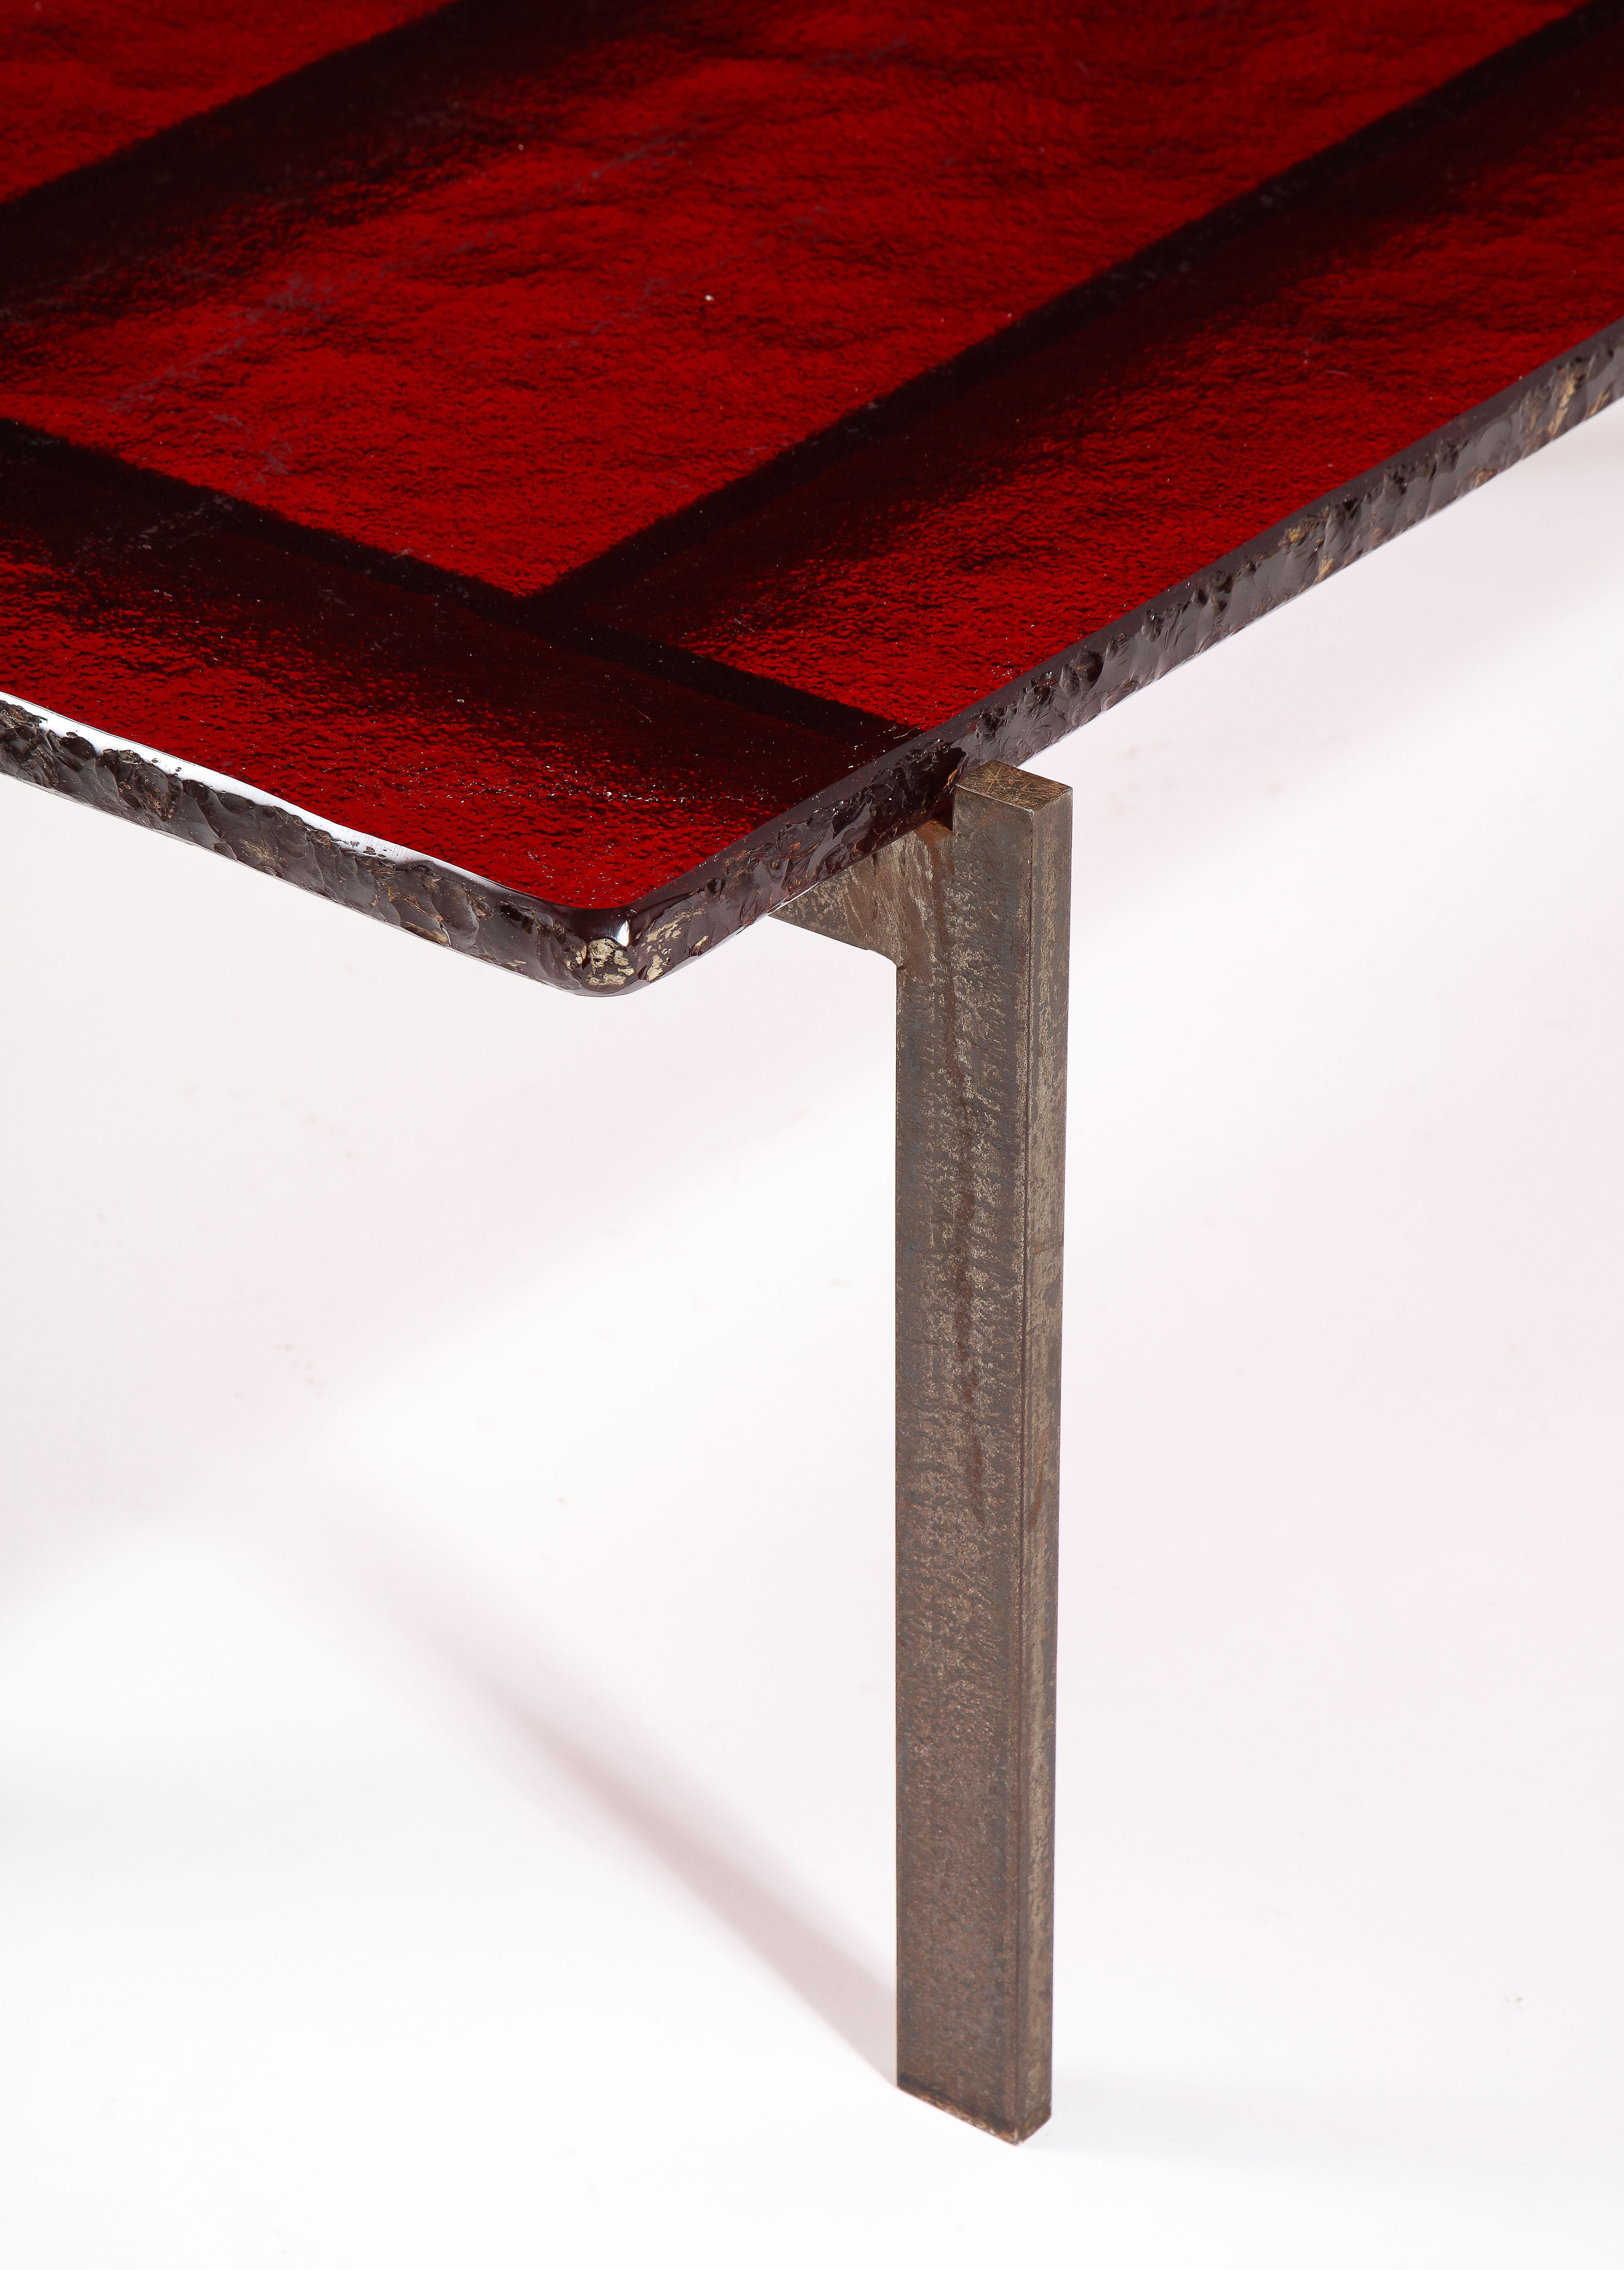 Ruby Red Saint Gobain Glass & Steel Modernist Coffee Table, France 1960's For Sale 1